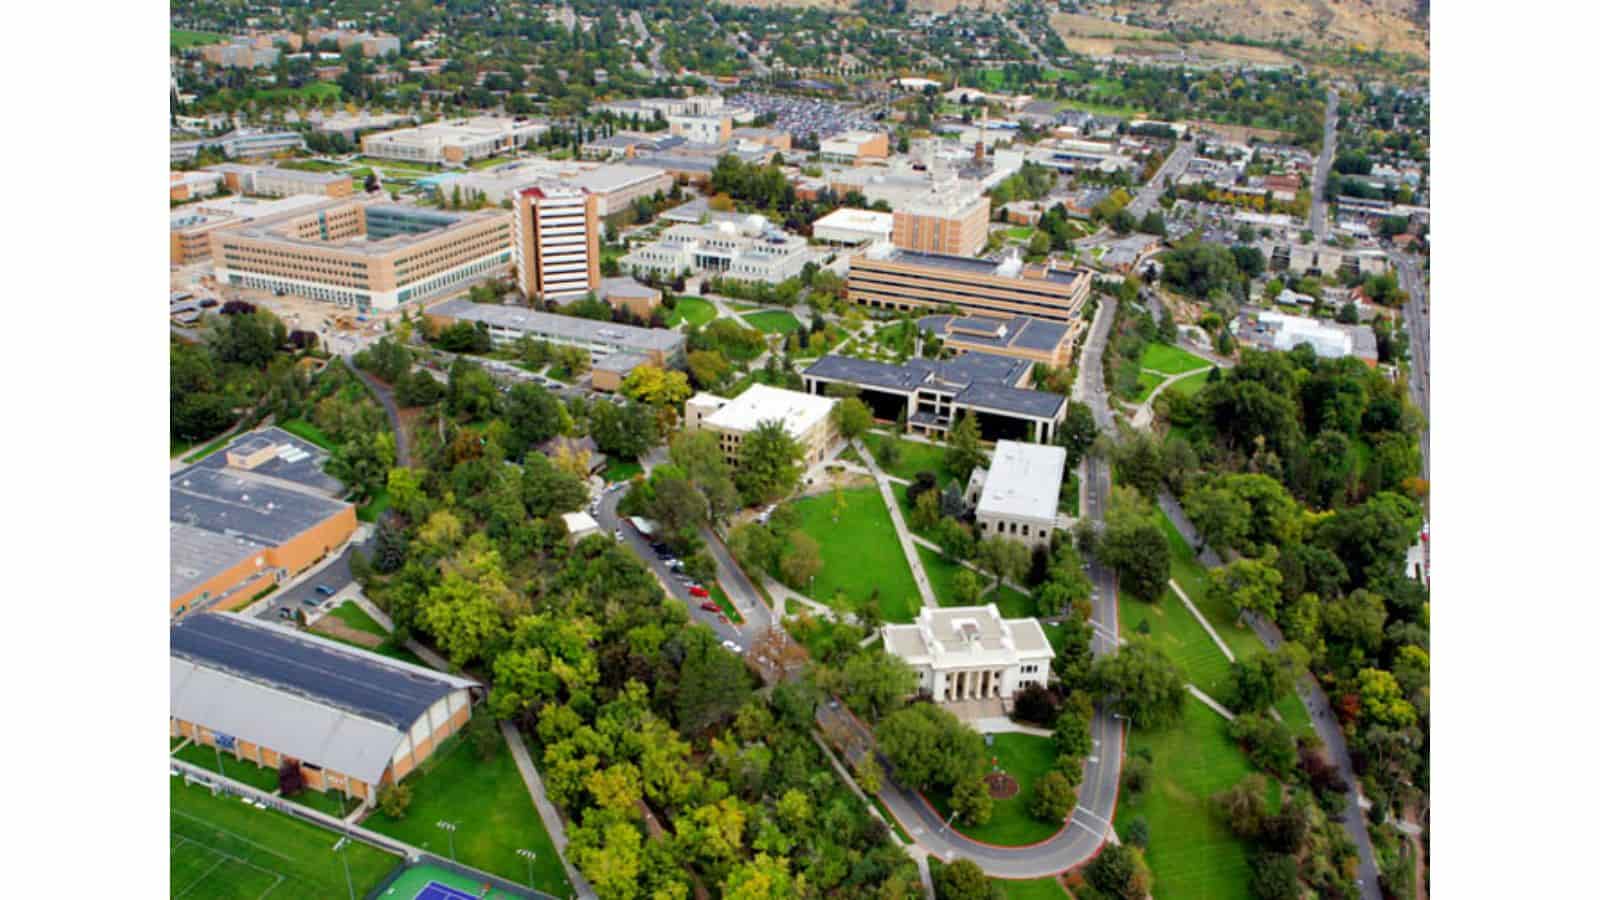 Brigham Young University's Locations